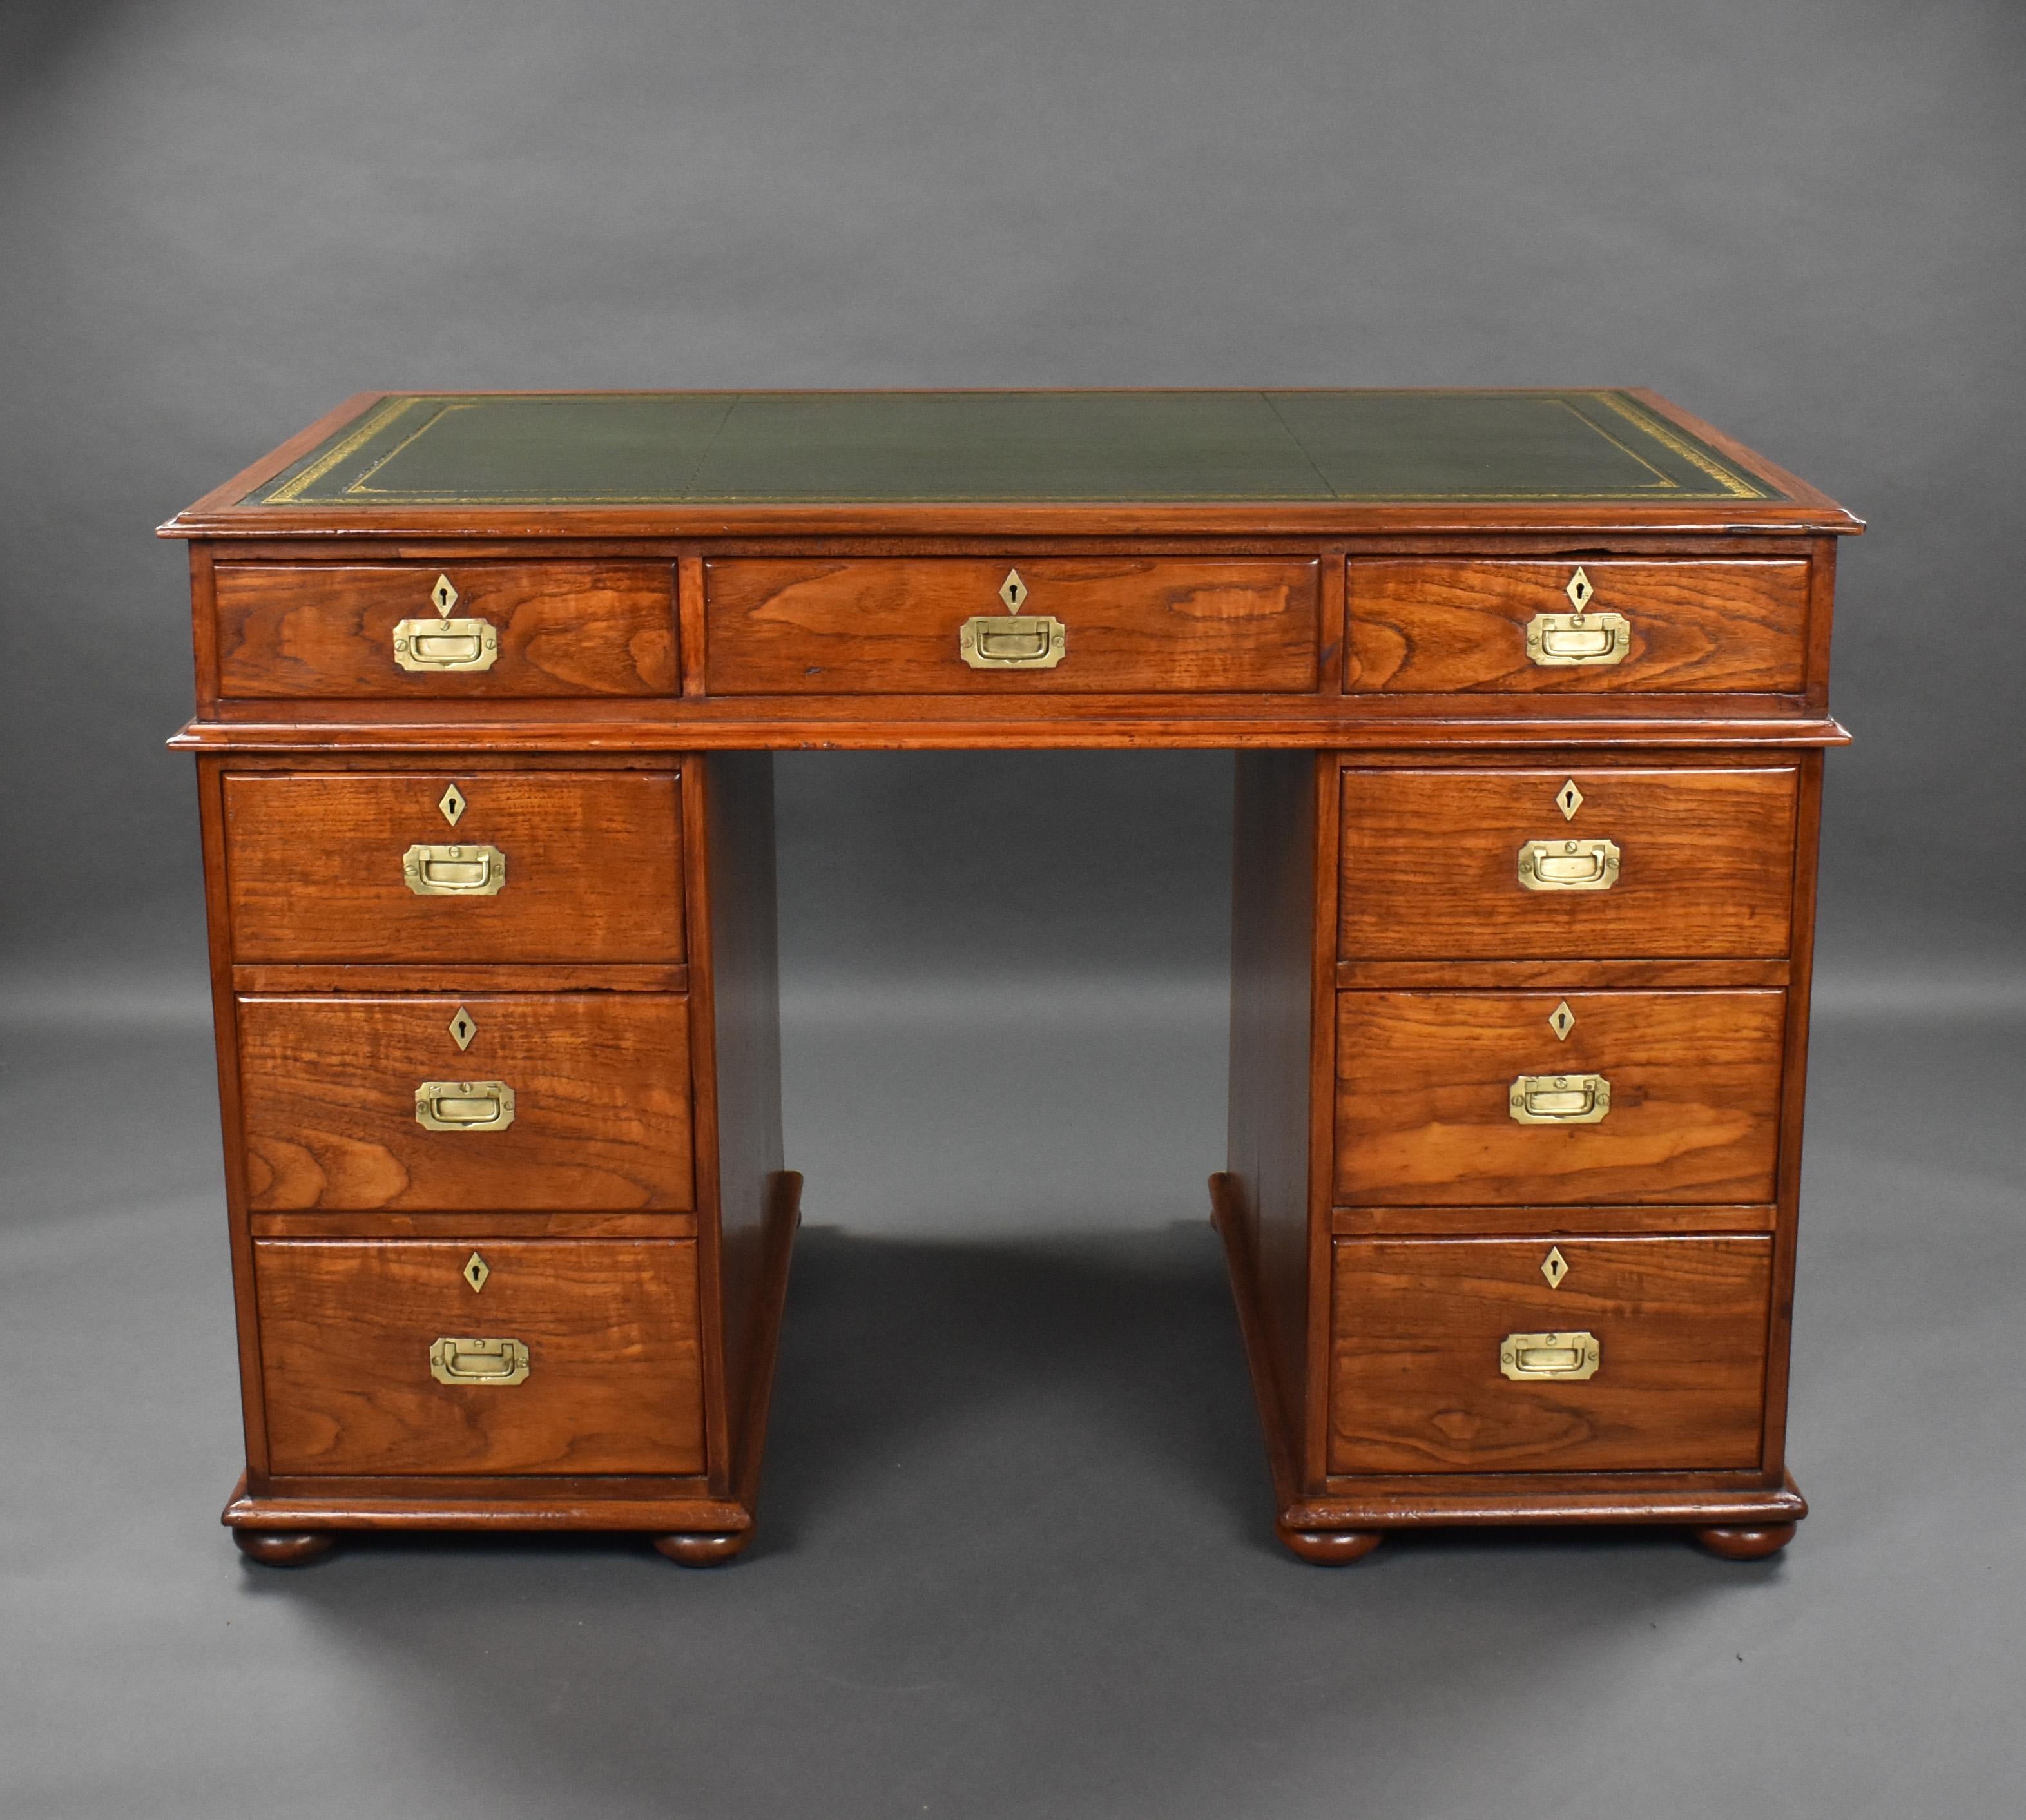 For sale is a good quality Victorian teak campaign style desk, the top having a green leather skiver, decorated with gold tooling above three drawers each with inset brass handles and escutcheons. The top fits onto two pedestals, each with an